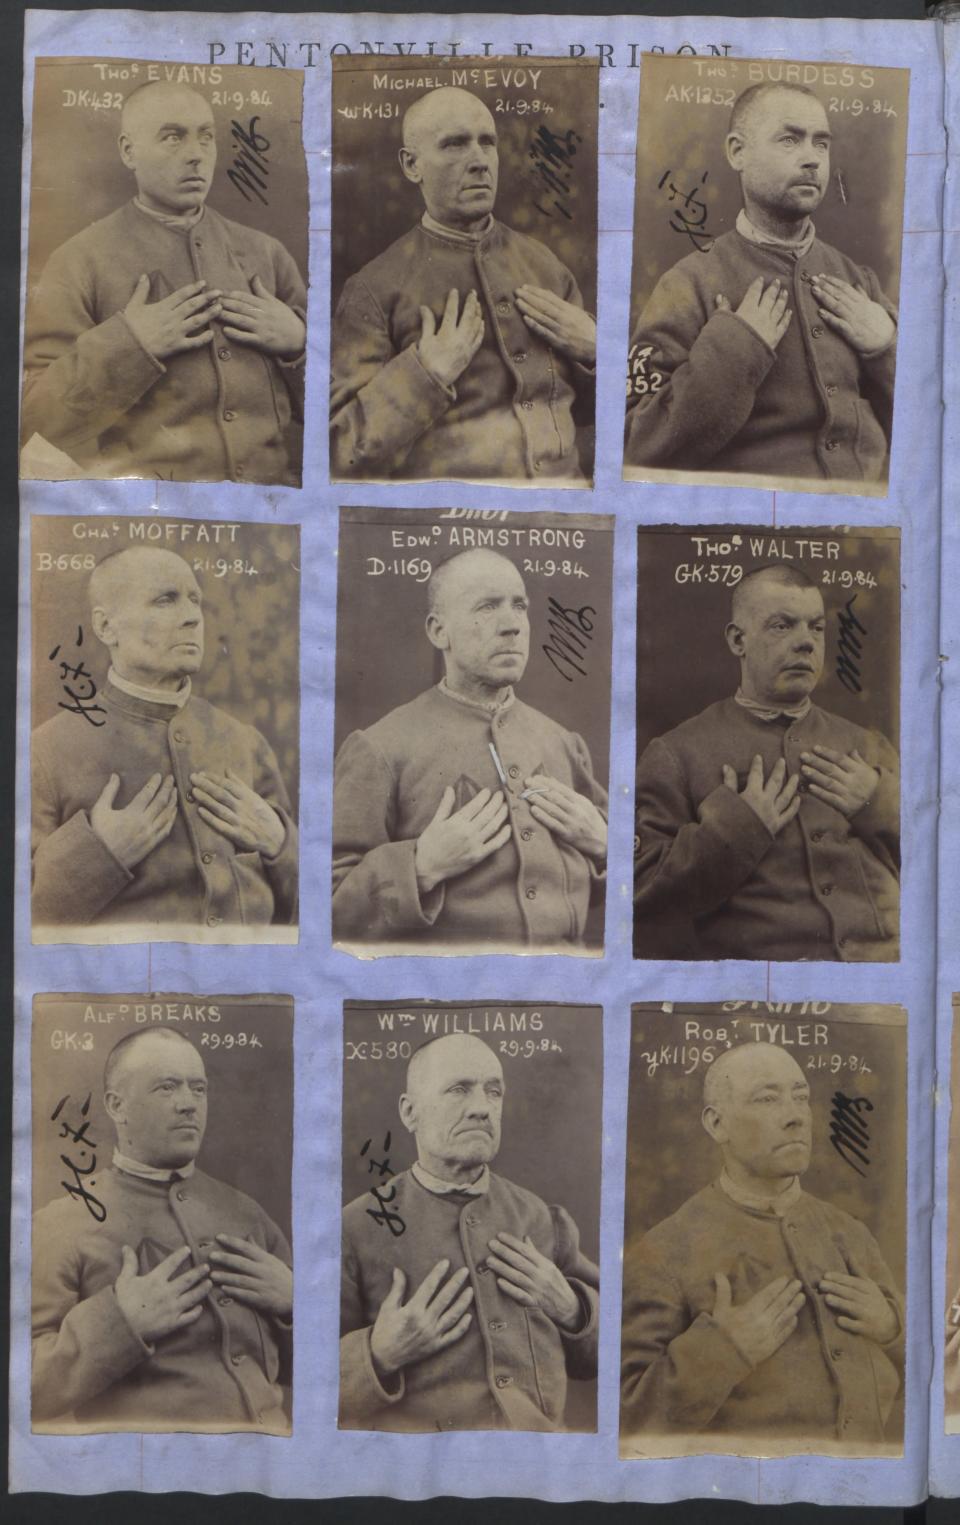 A selection of 'mugshots' from the late 1880s shows male criminals holding their hands to their chests to help identify themselves, as many had lost fingers in agricultural accidents or had tattoos. Bottom left is Alfred Breaks, a miner who had six convictions for including assault, theft, and for being a 'vagabond'. He was tried in 1884, found guilty sentenced to 7 years of penal servitude.